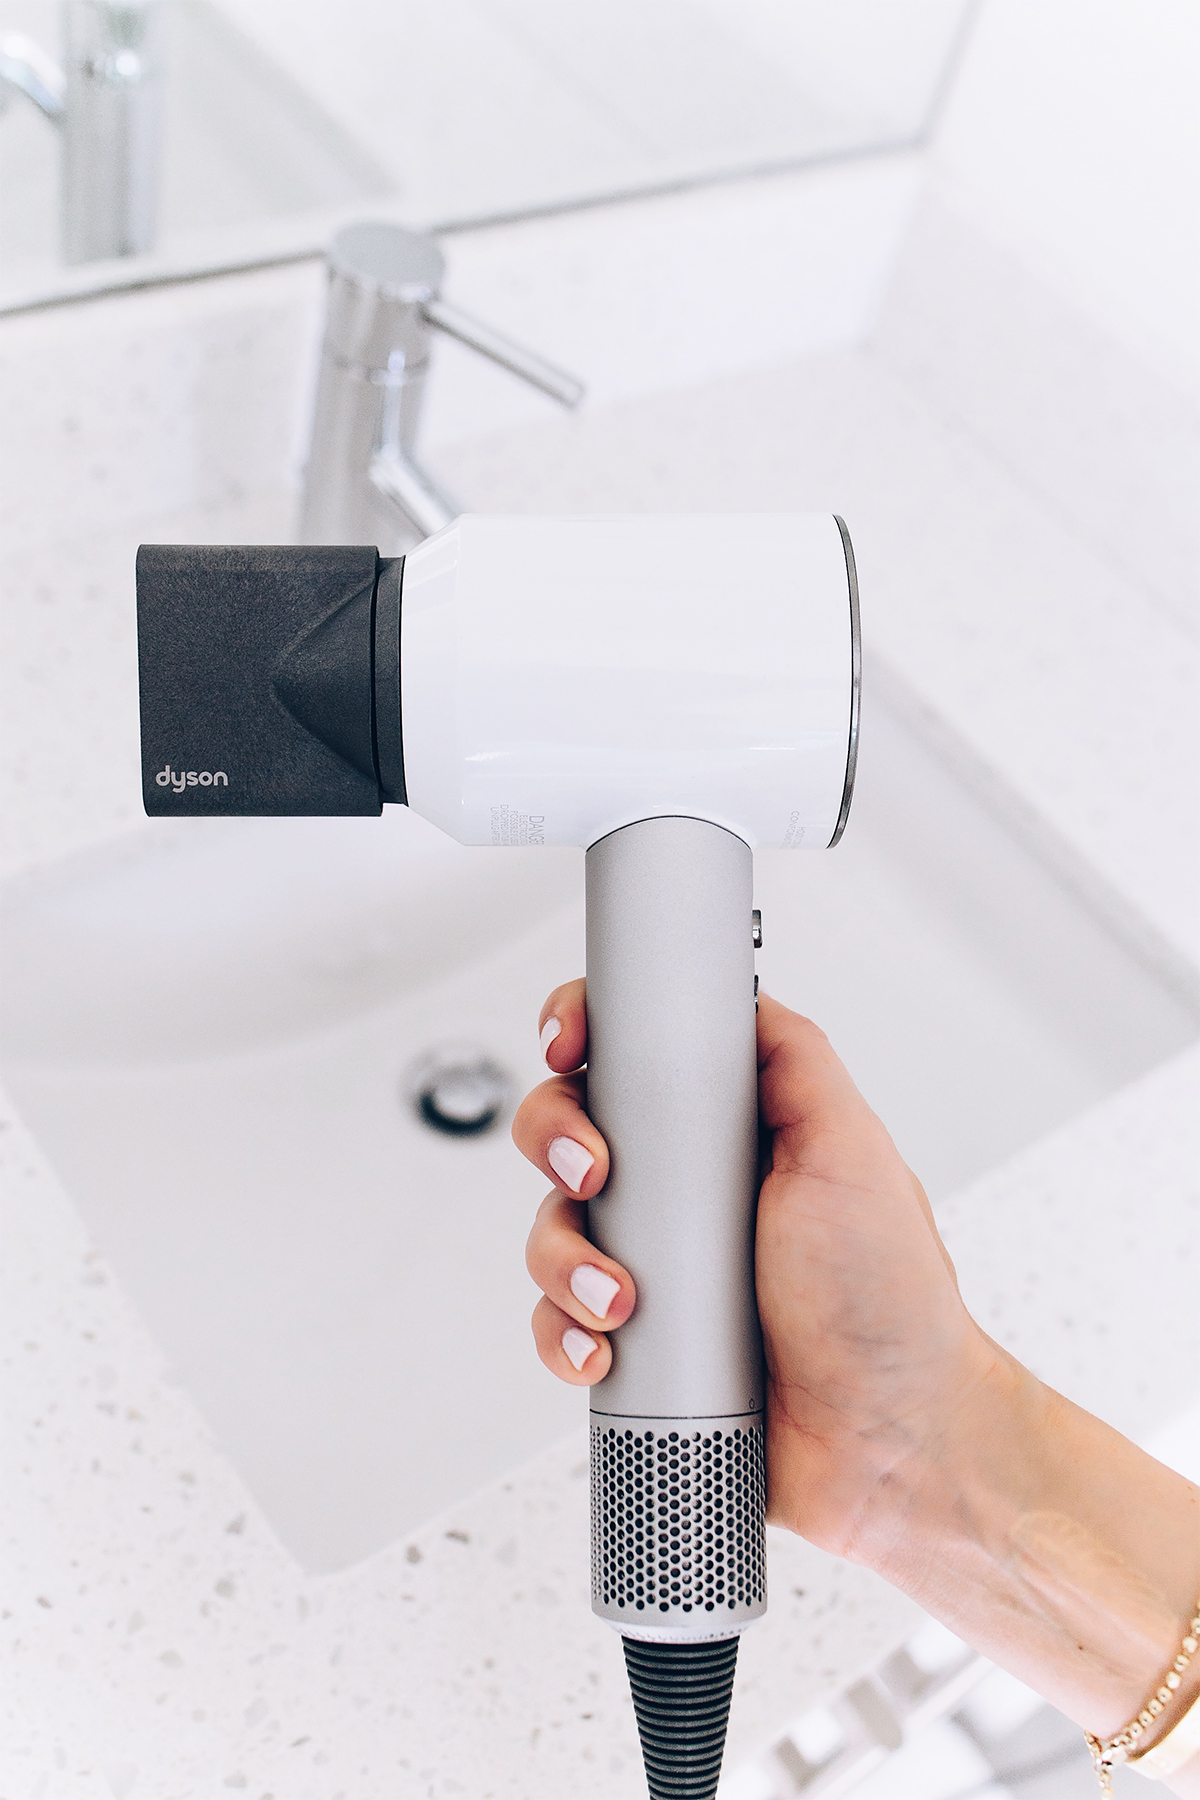 Dyson Hair Dryer with Styling Nozzle